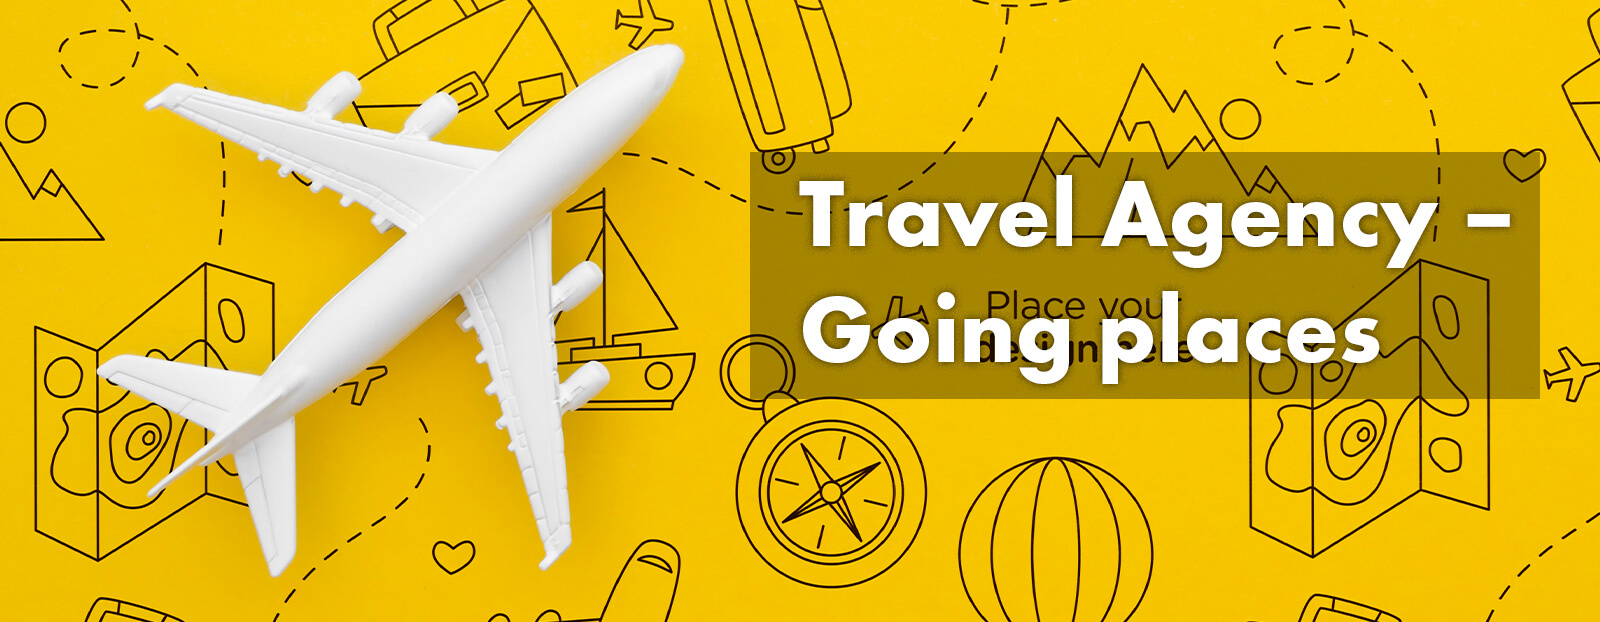 Travel Agency Going places deAsra Blog